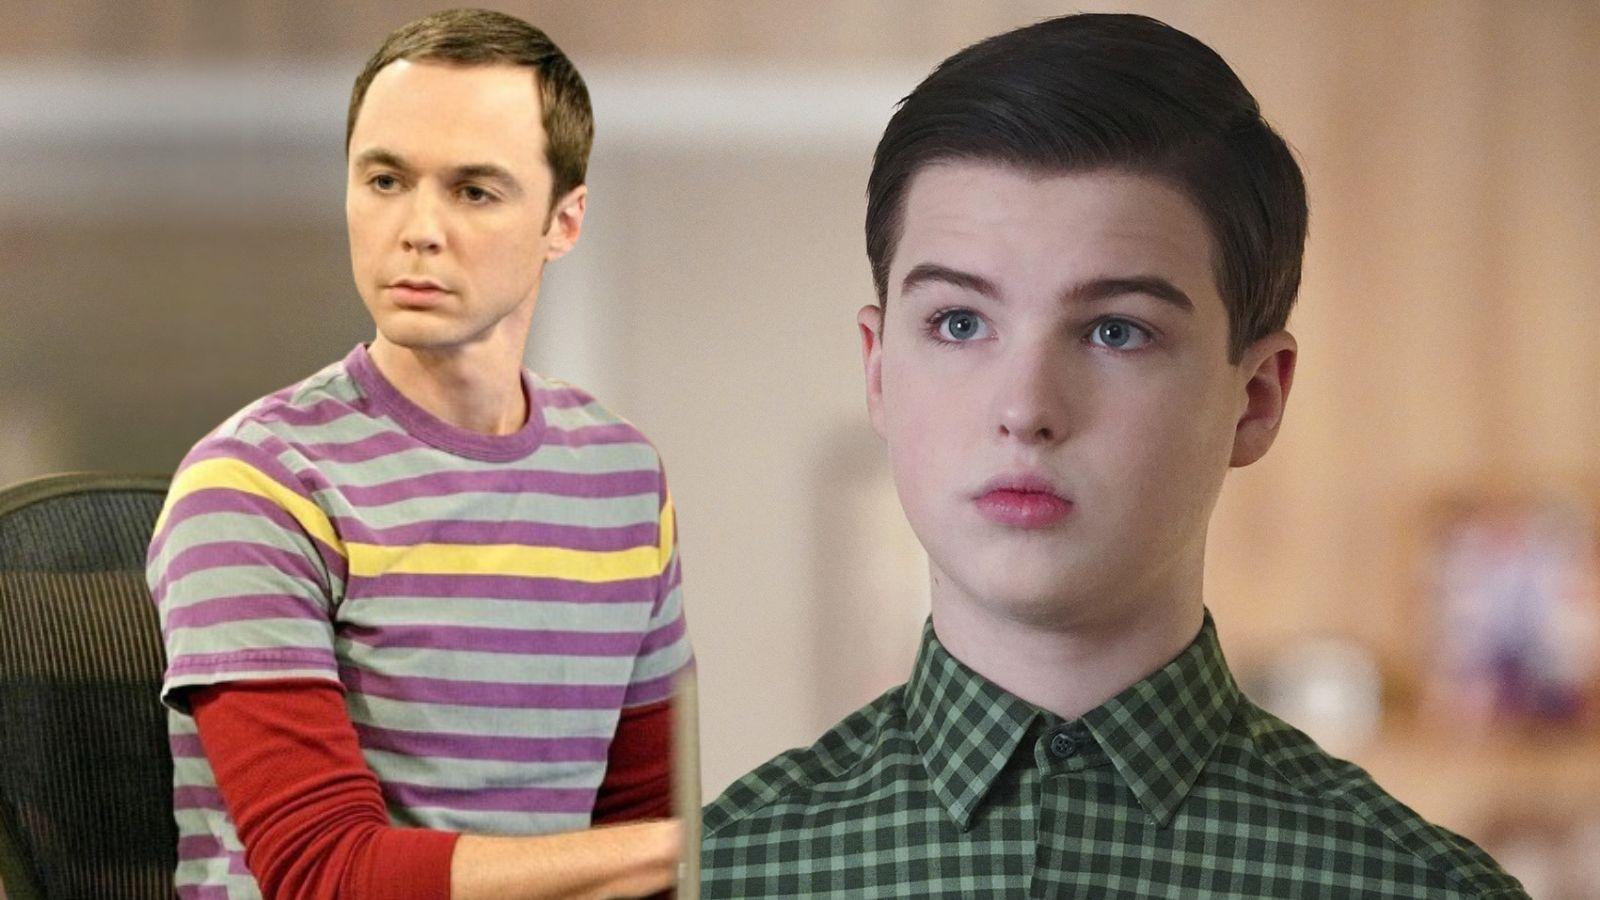 Jim Parsons and Iain Armitage as Sheldon Cooper in Young Sheldon and The Big Bang Theory